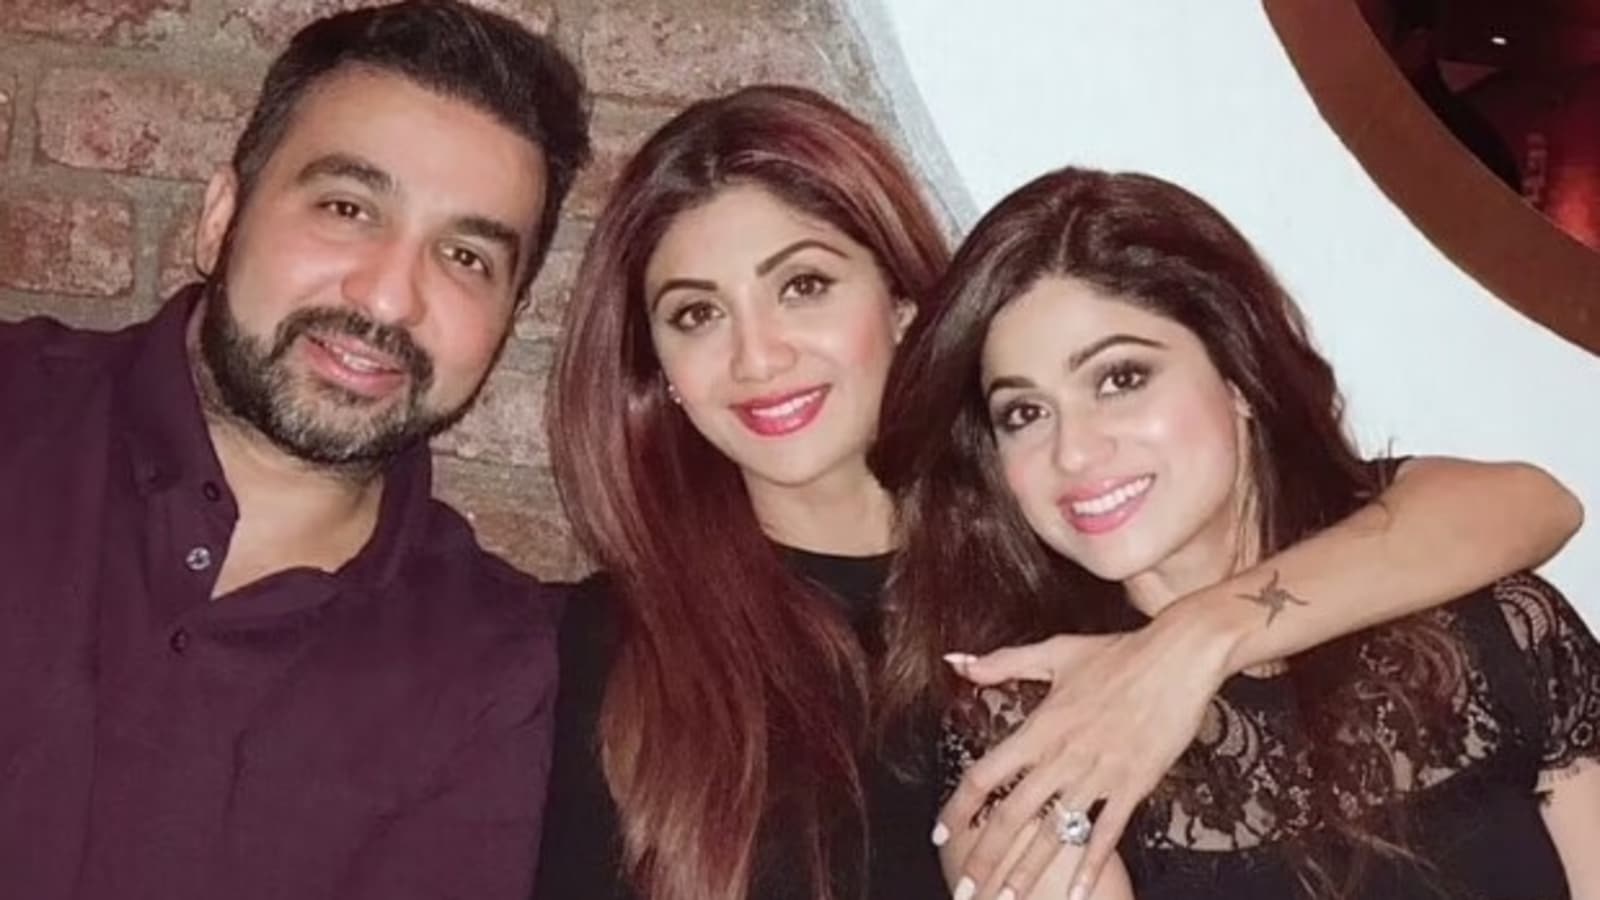 Sexy Shilpa Shetty Bf - Shilpa Shetty's sister Shamita Shetty shares cryptic post about inner  'strength' amid turbulent time for family | Bollywood - Hindustan Times